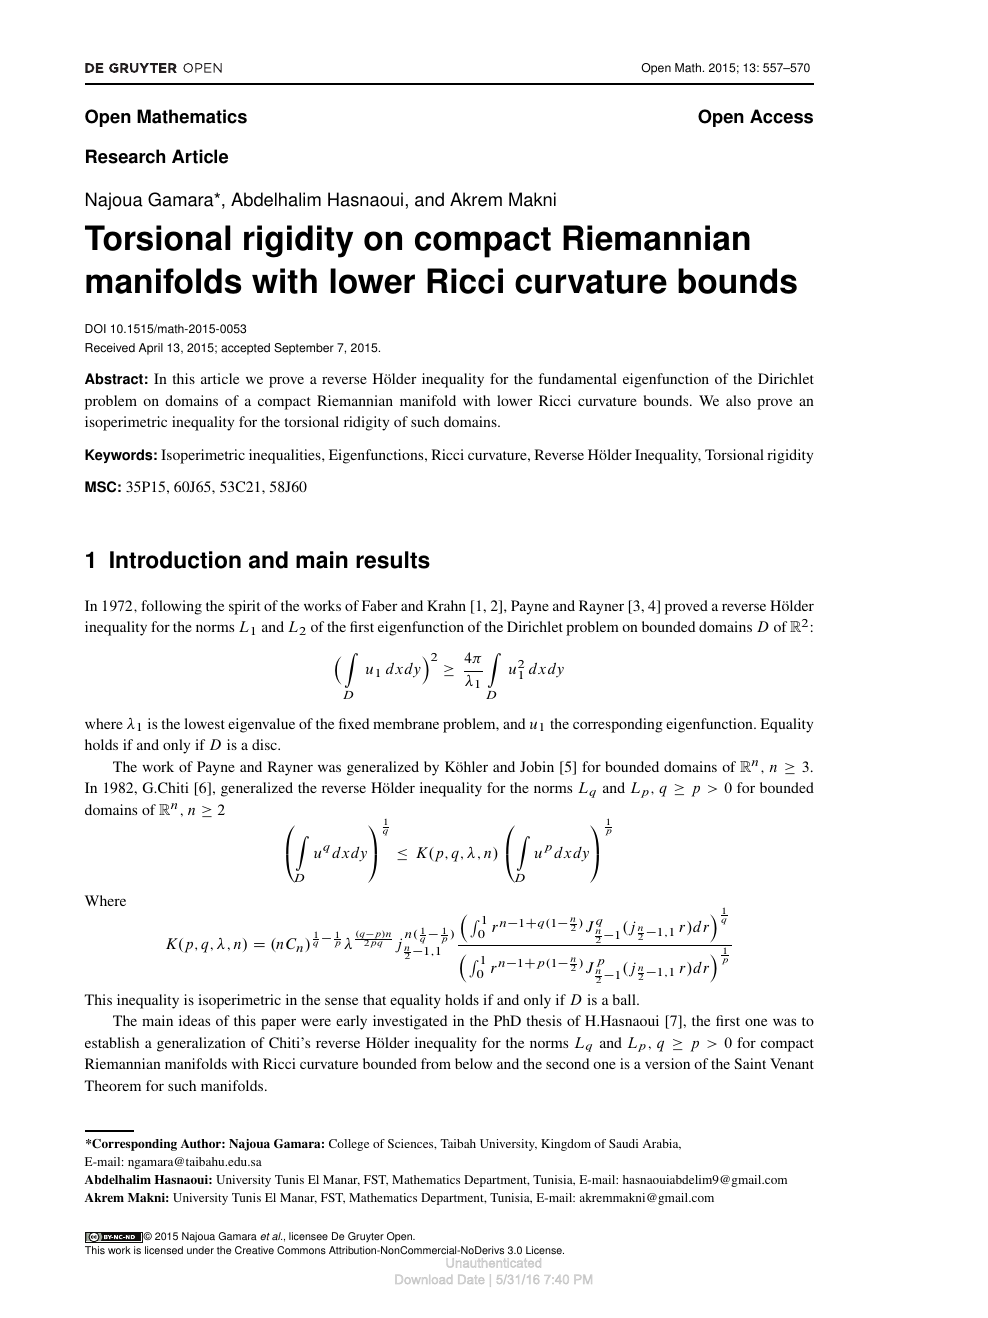 Torsional Rigidity On Compact Riemannian Manifolds With Lower Ricci Curvature Bounds Topic Of Research Paper In Mathematics Download Scholarly Article Pdf And Read For Free On Cyberleninka Open Science Hub